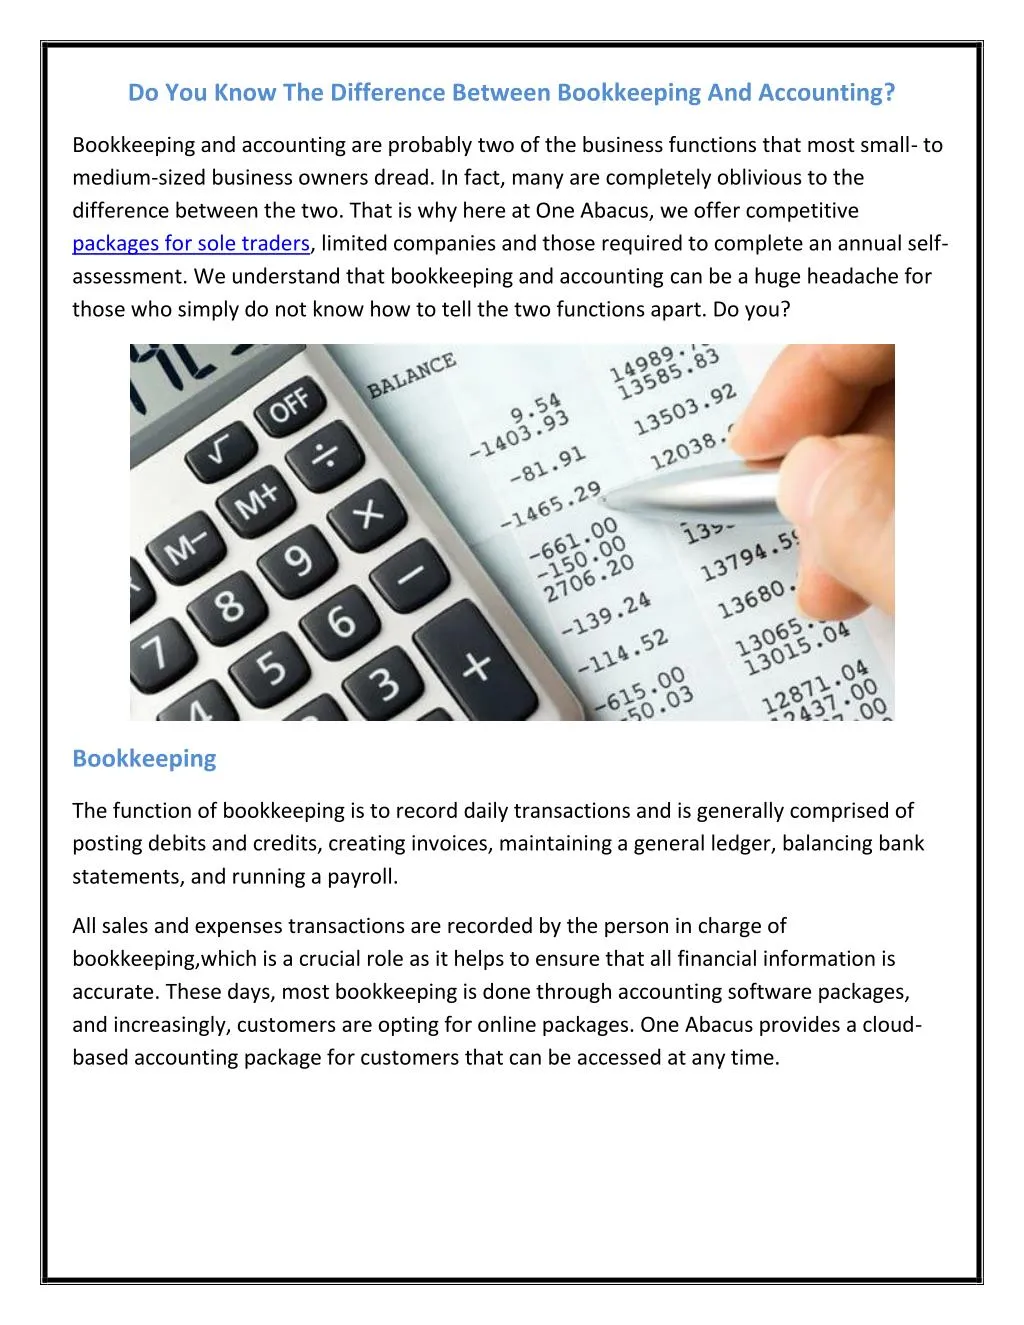 distinction between bookkeeping and accounting